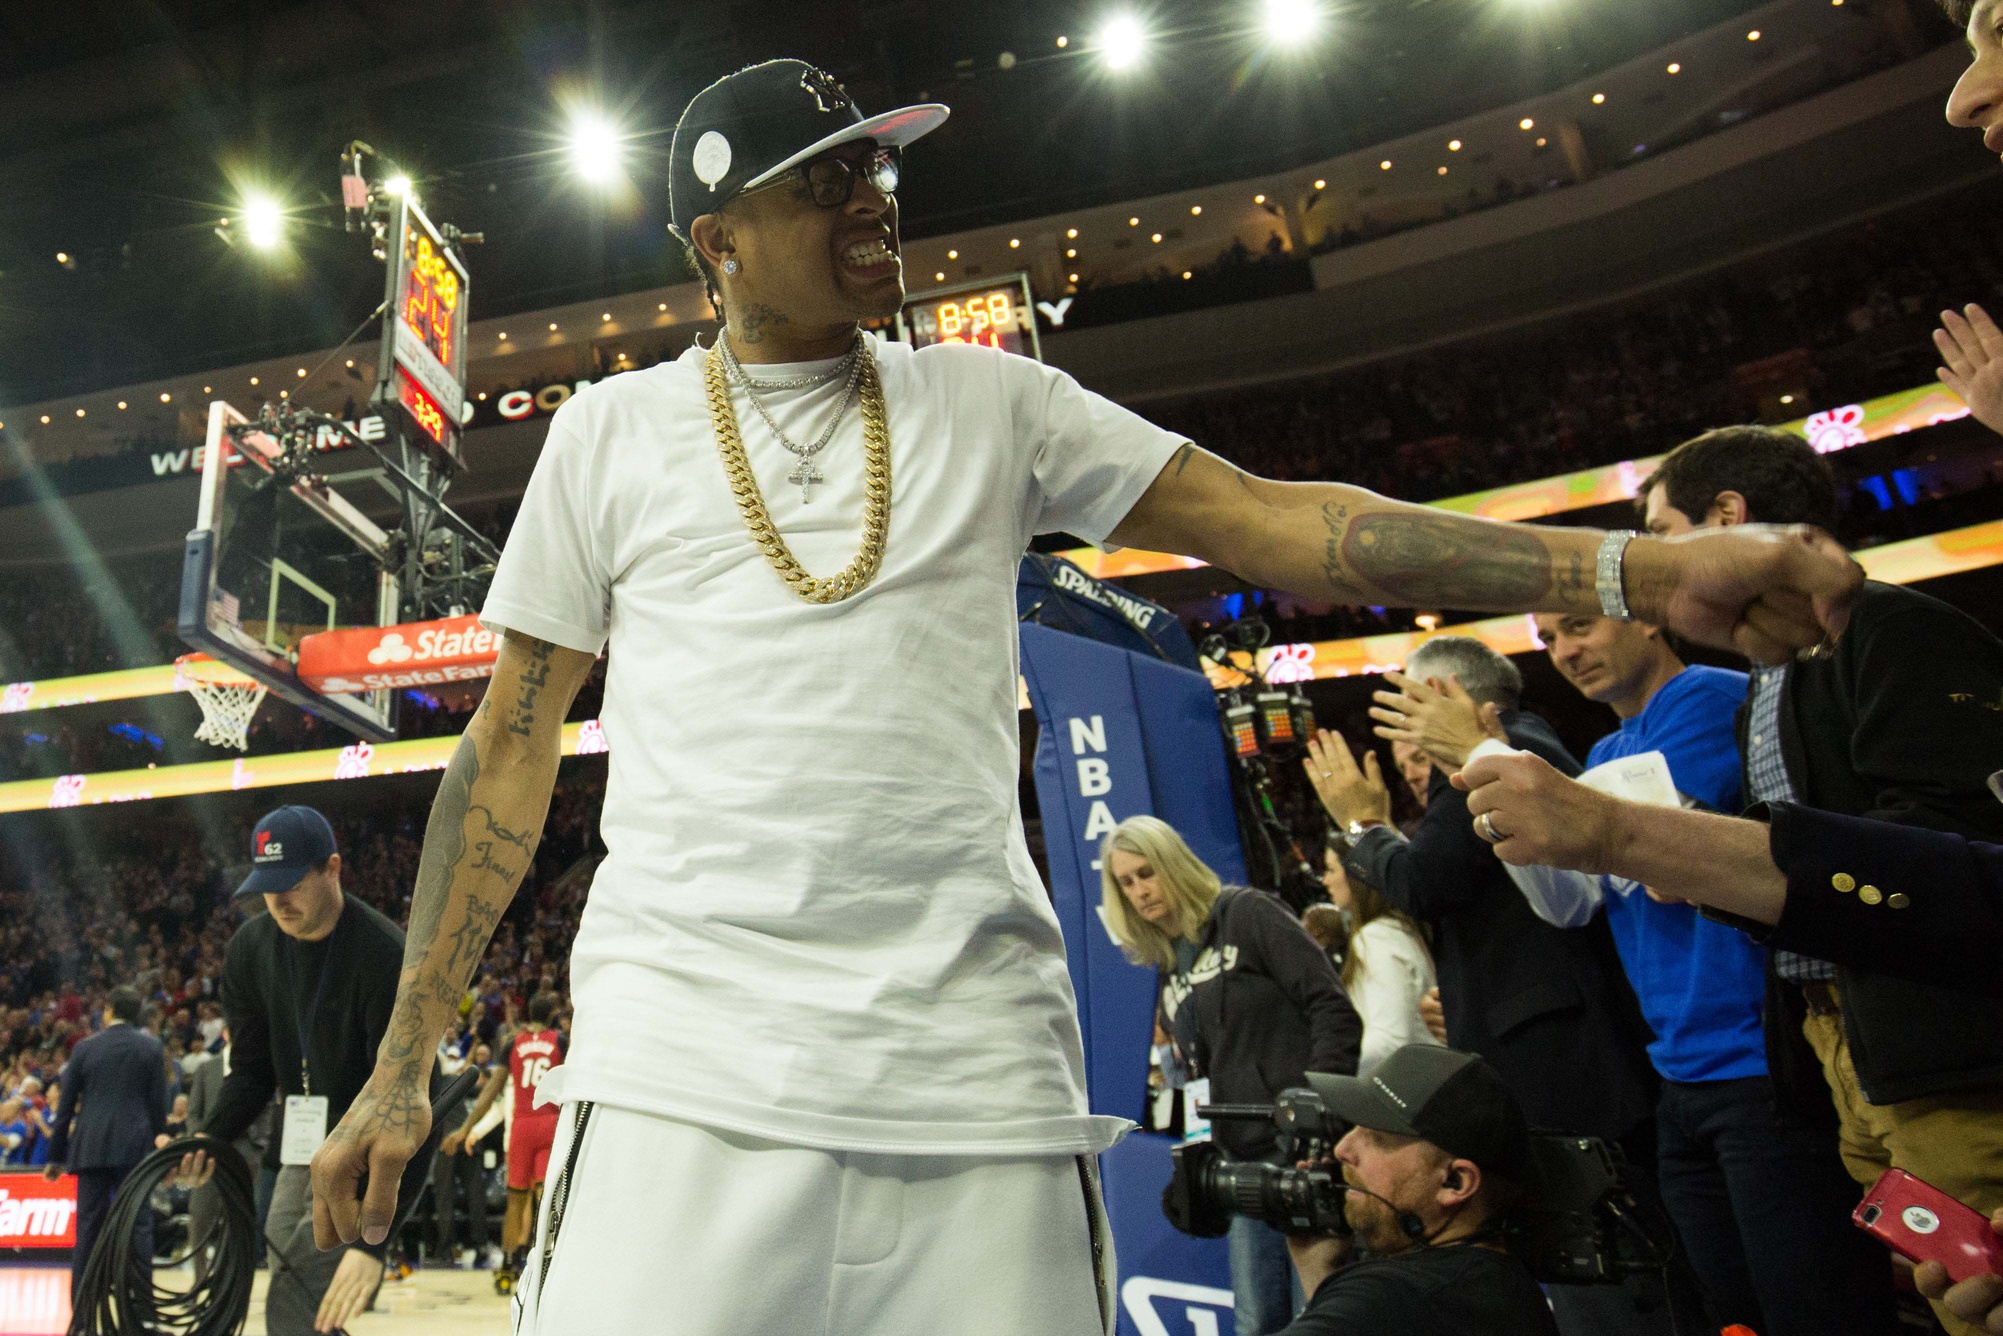 NBA Hall of Fame member and former Philadelphia 76ers Allen Iverson cheers on with fans in game two of the first round of the 2018 NBA Playoffs against the Miami Heat at Wells Fargo Center.